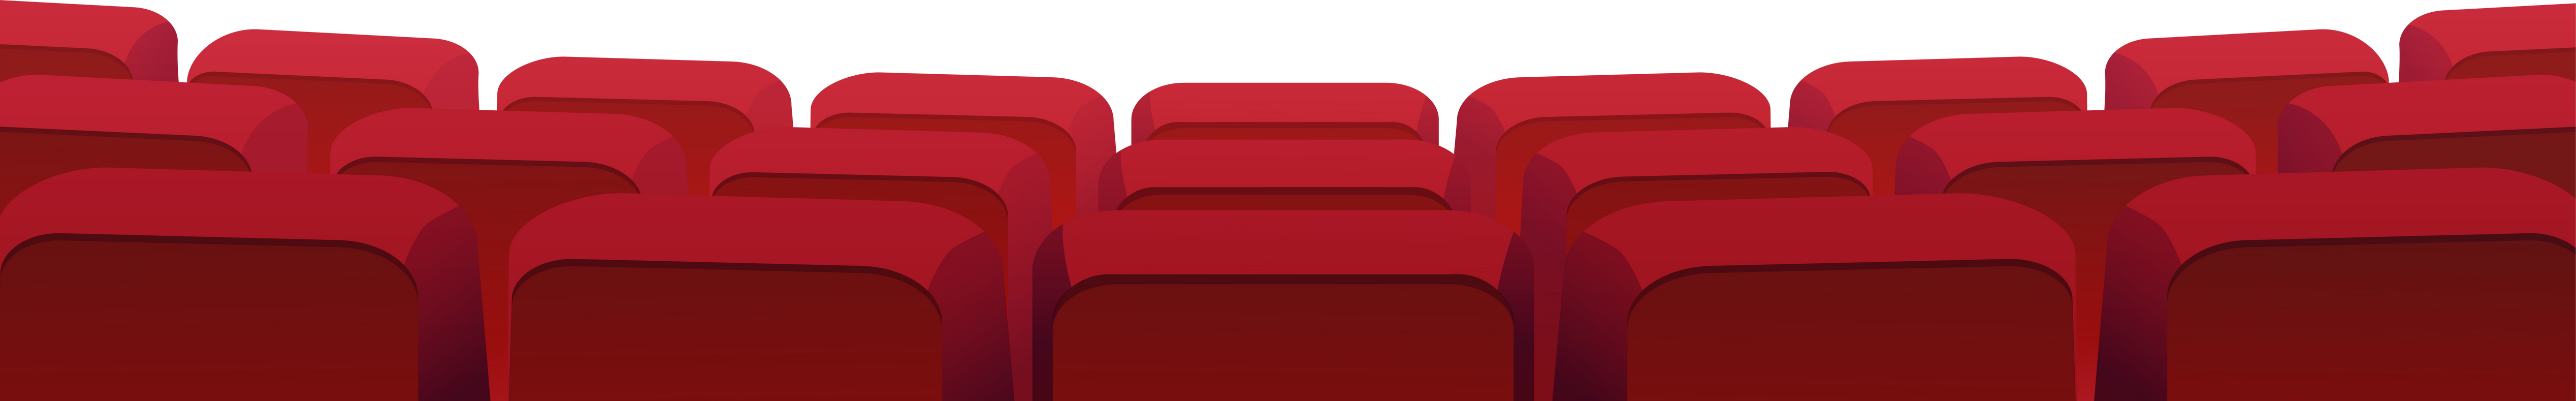 Armchairs Rear View in Cinema Theater, Seats Row